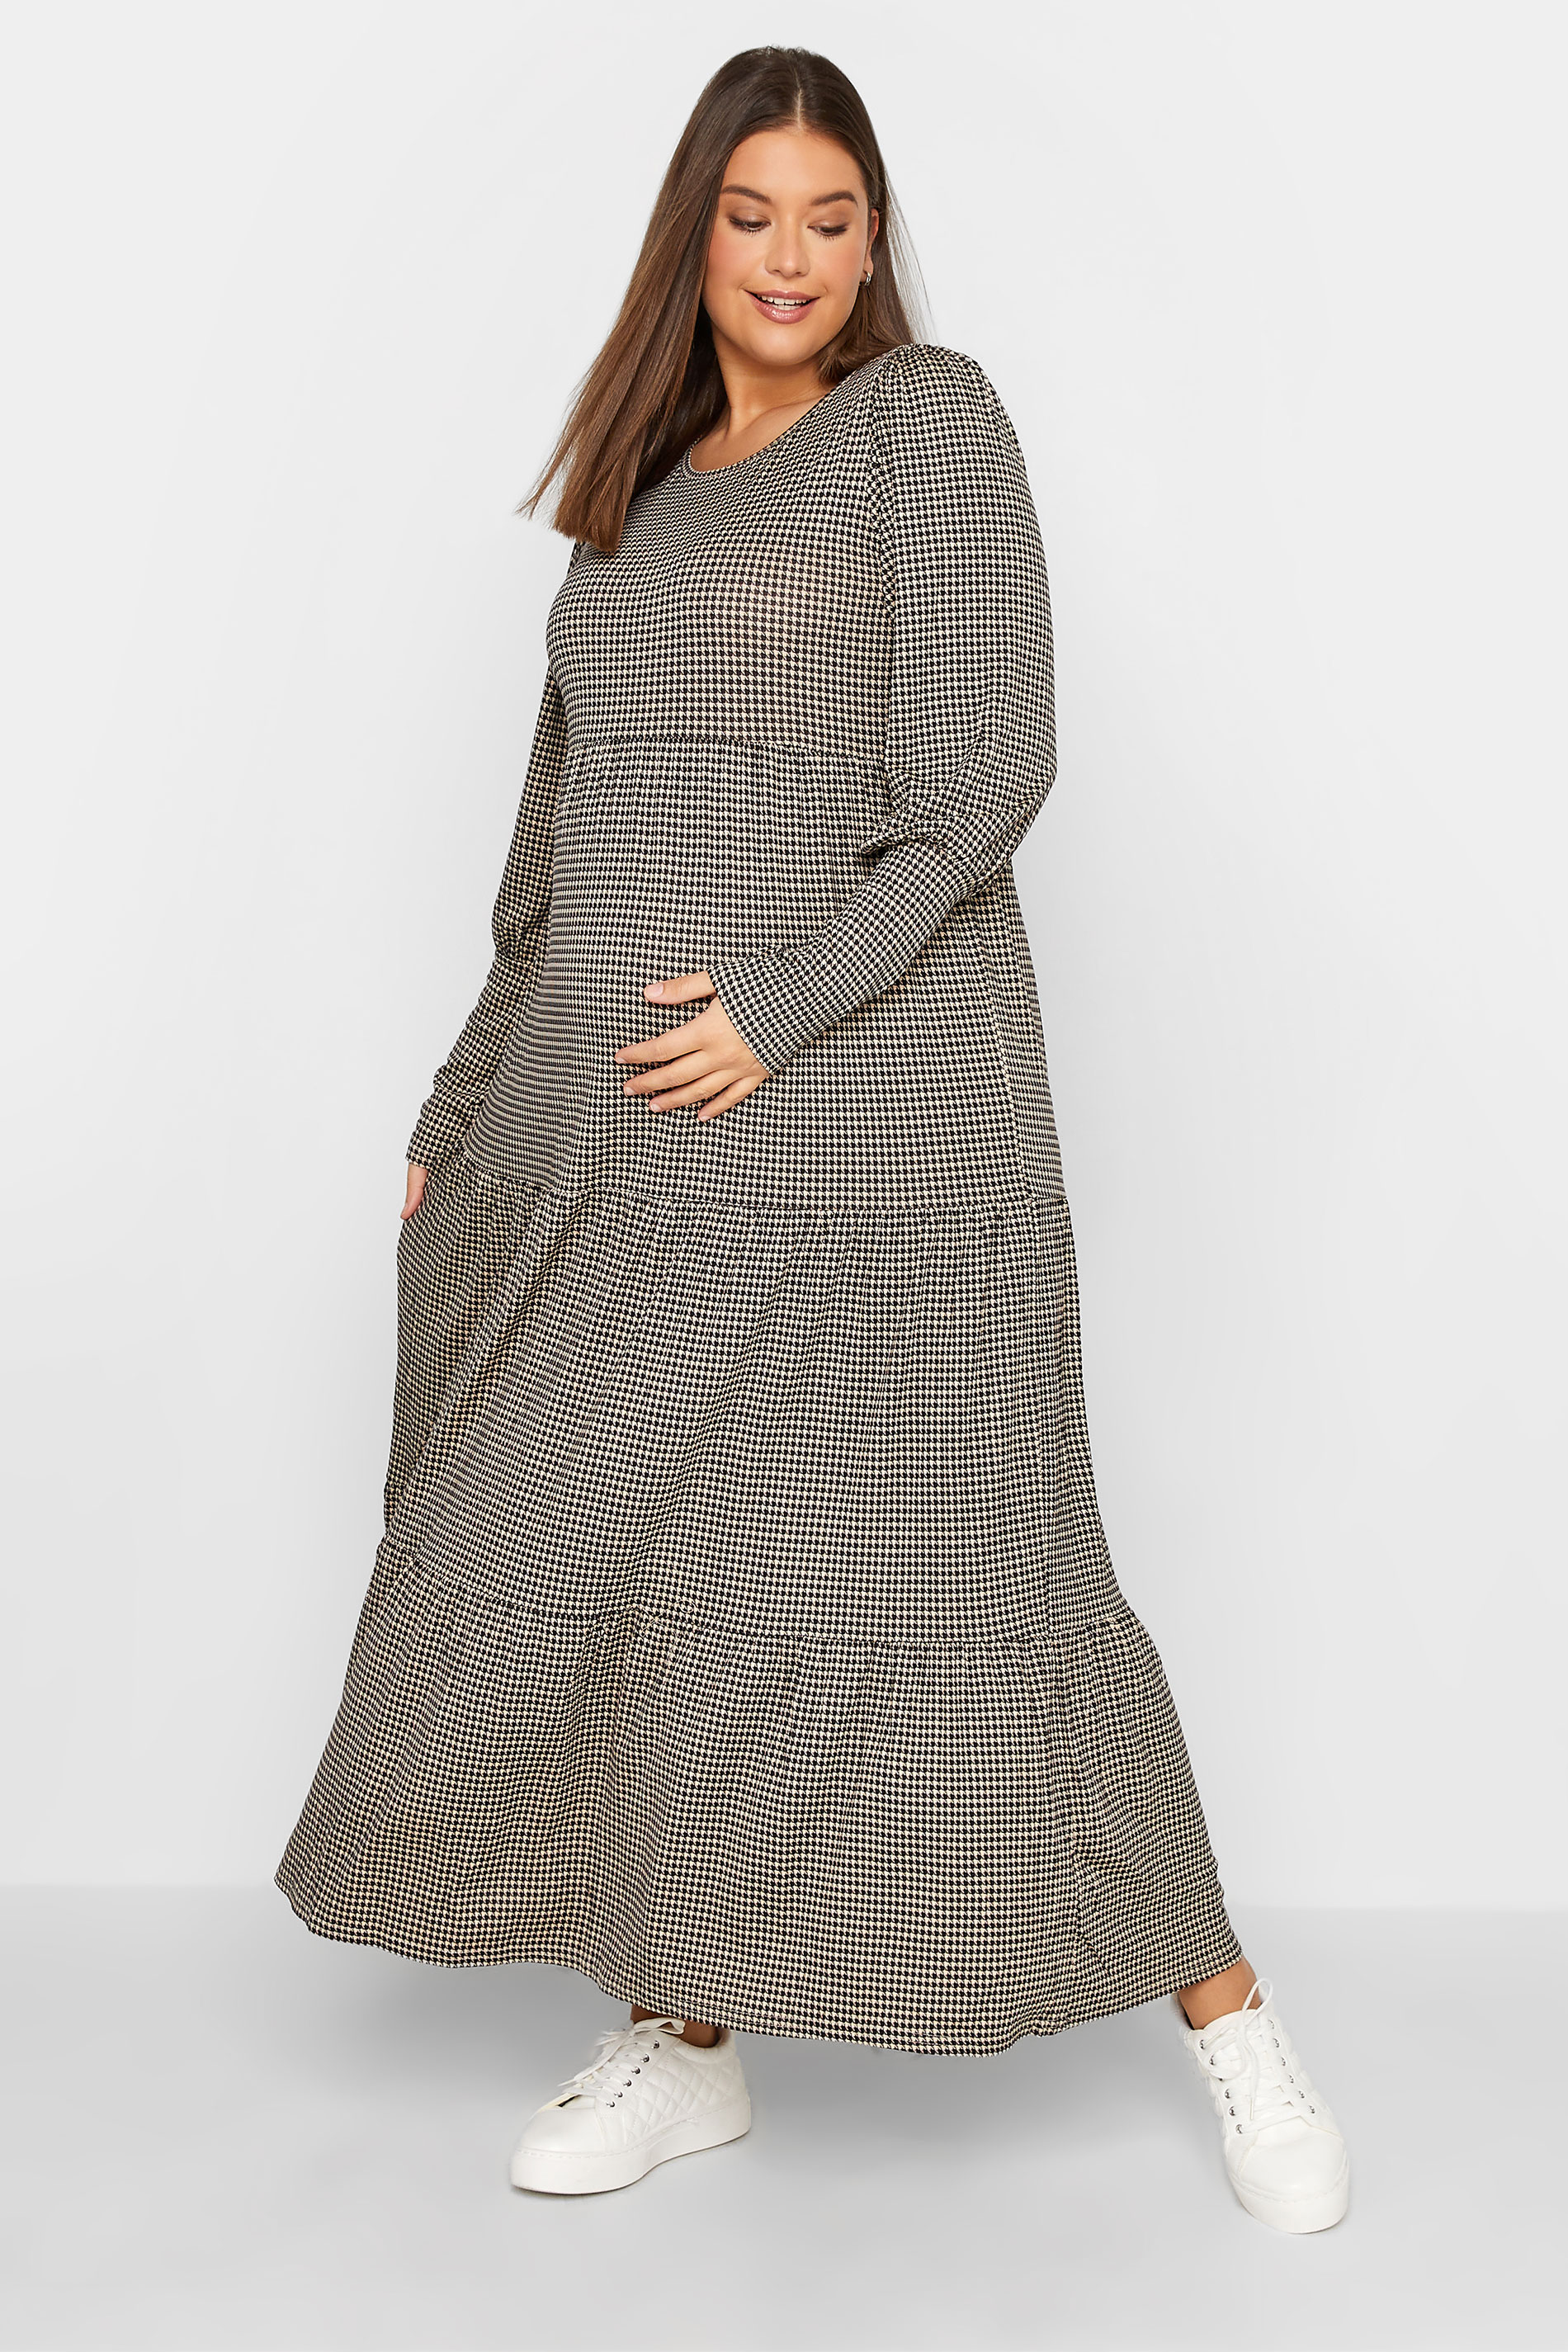 Tall Women's LTS Maternity Beige Brown Dogtooth Check Smock Dress | Long Tall Sally 1